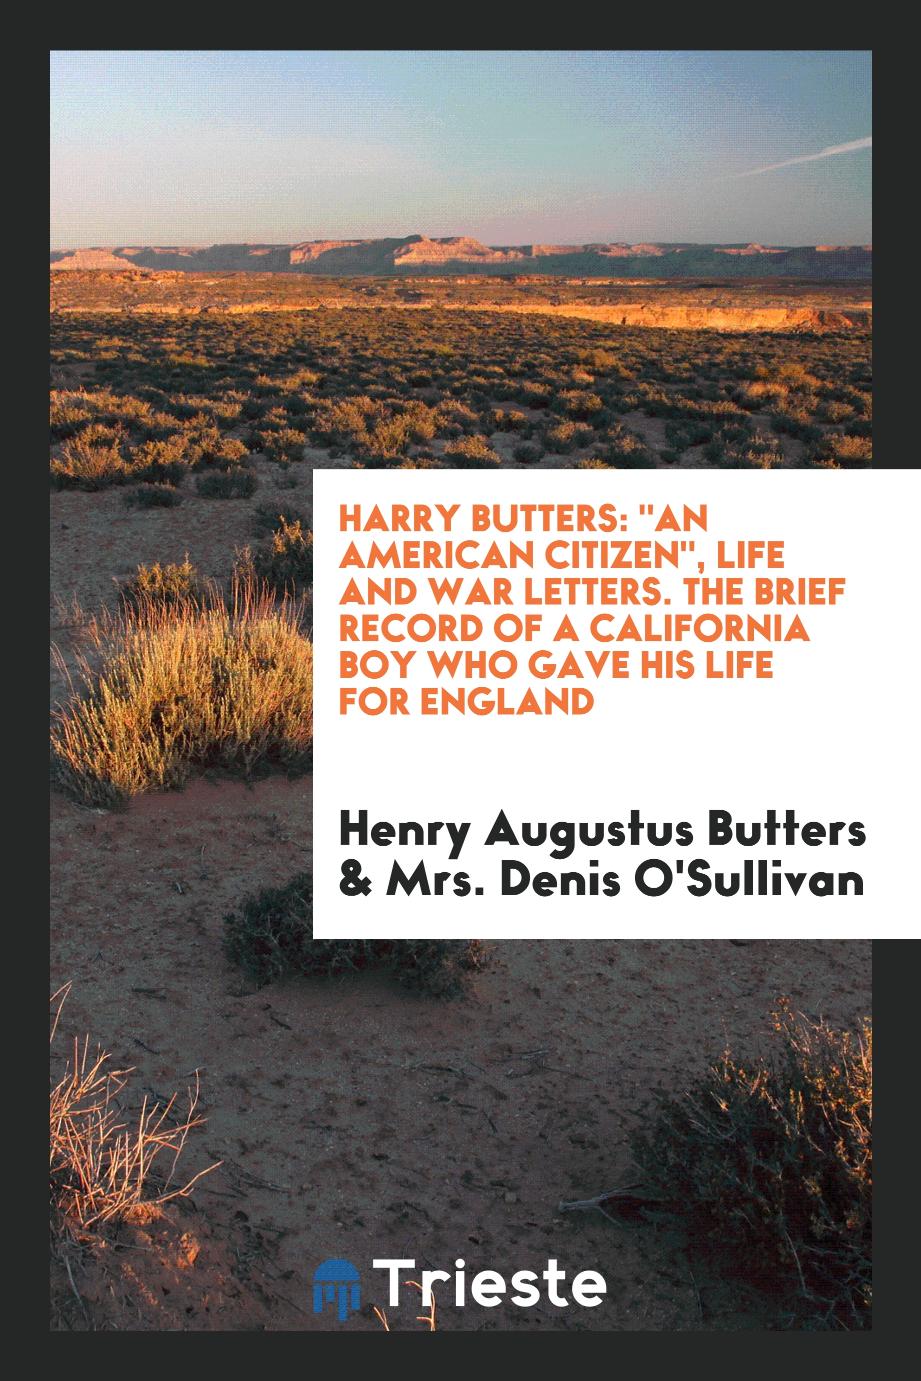 Harry Butters: "An American Citizen", Life and War Letters. The Brief Record of a California Boy Who Gave His Life for England